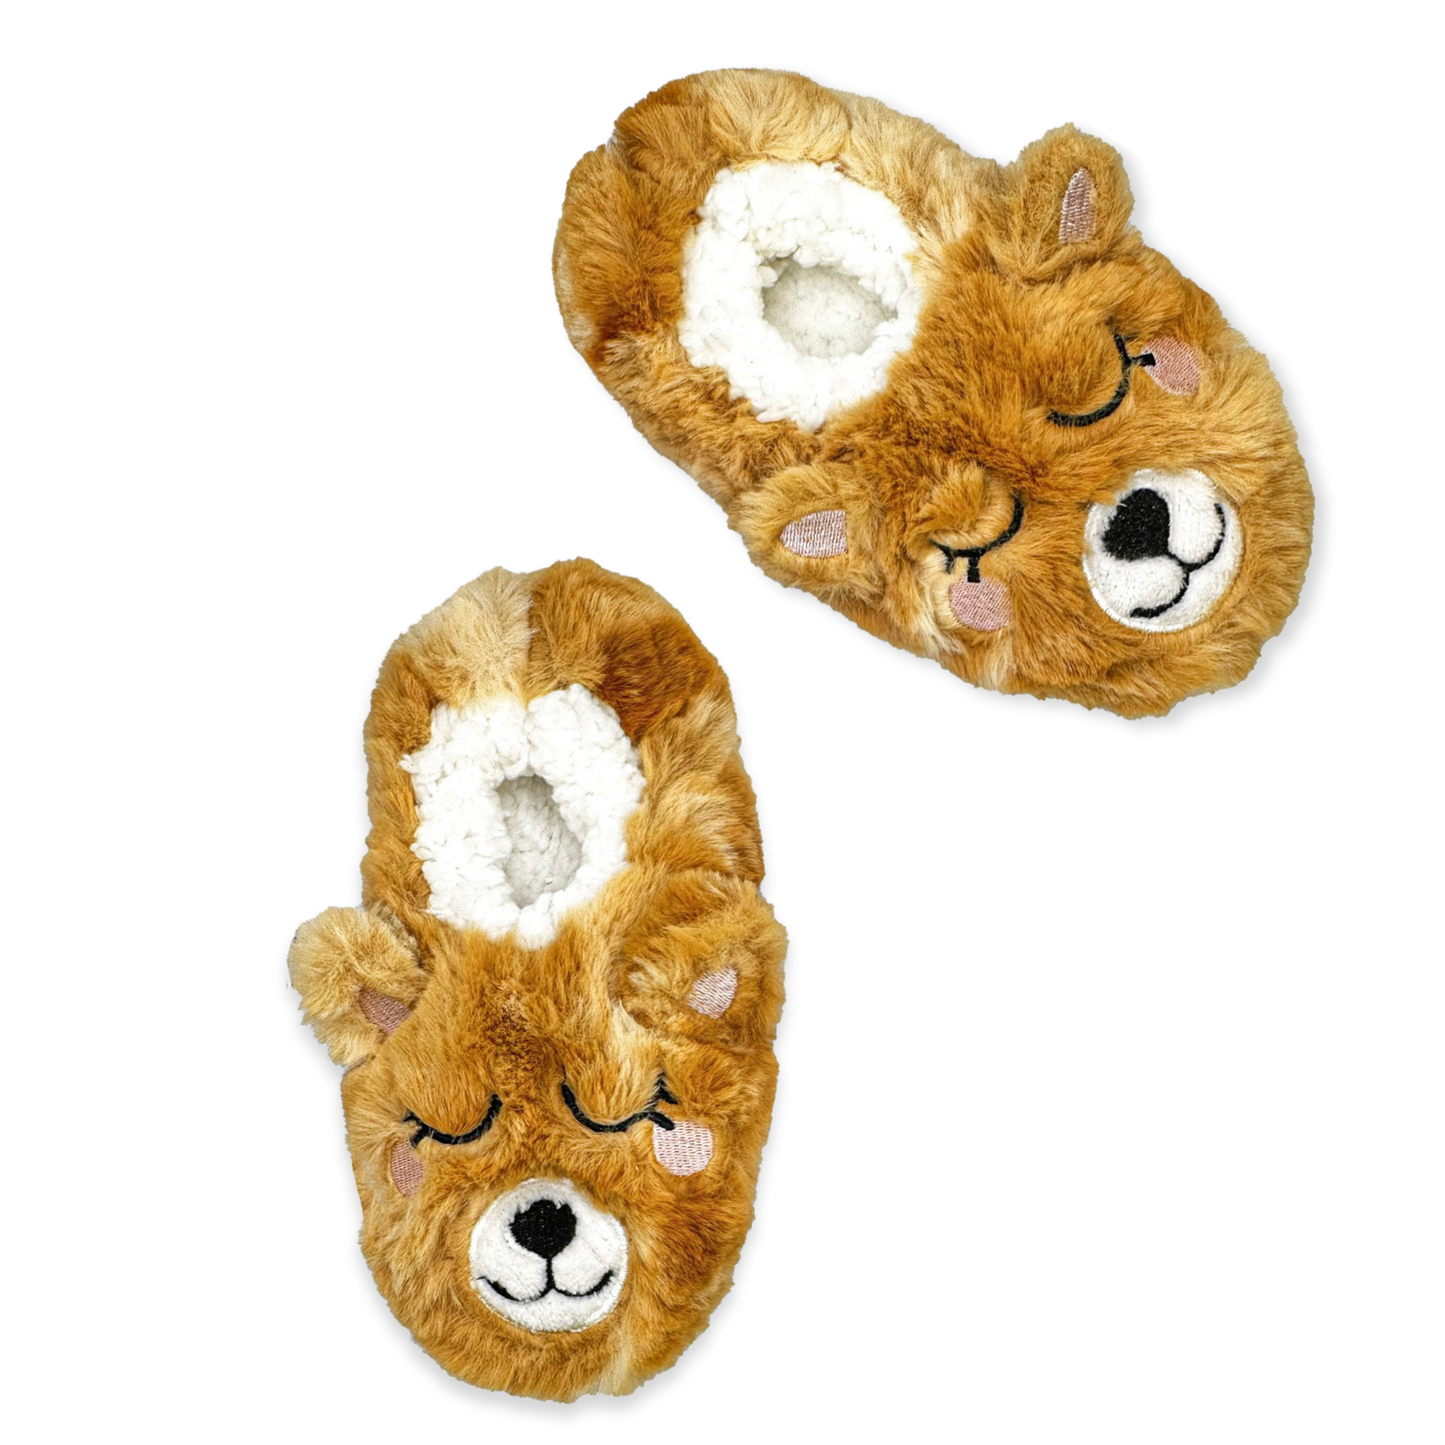 A pair of pink slippers with a smiling bear face on them